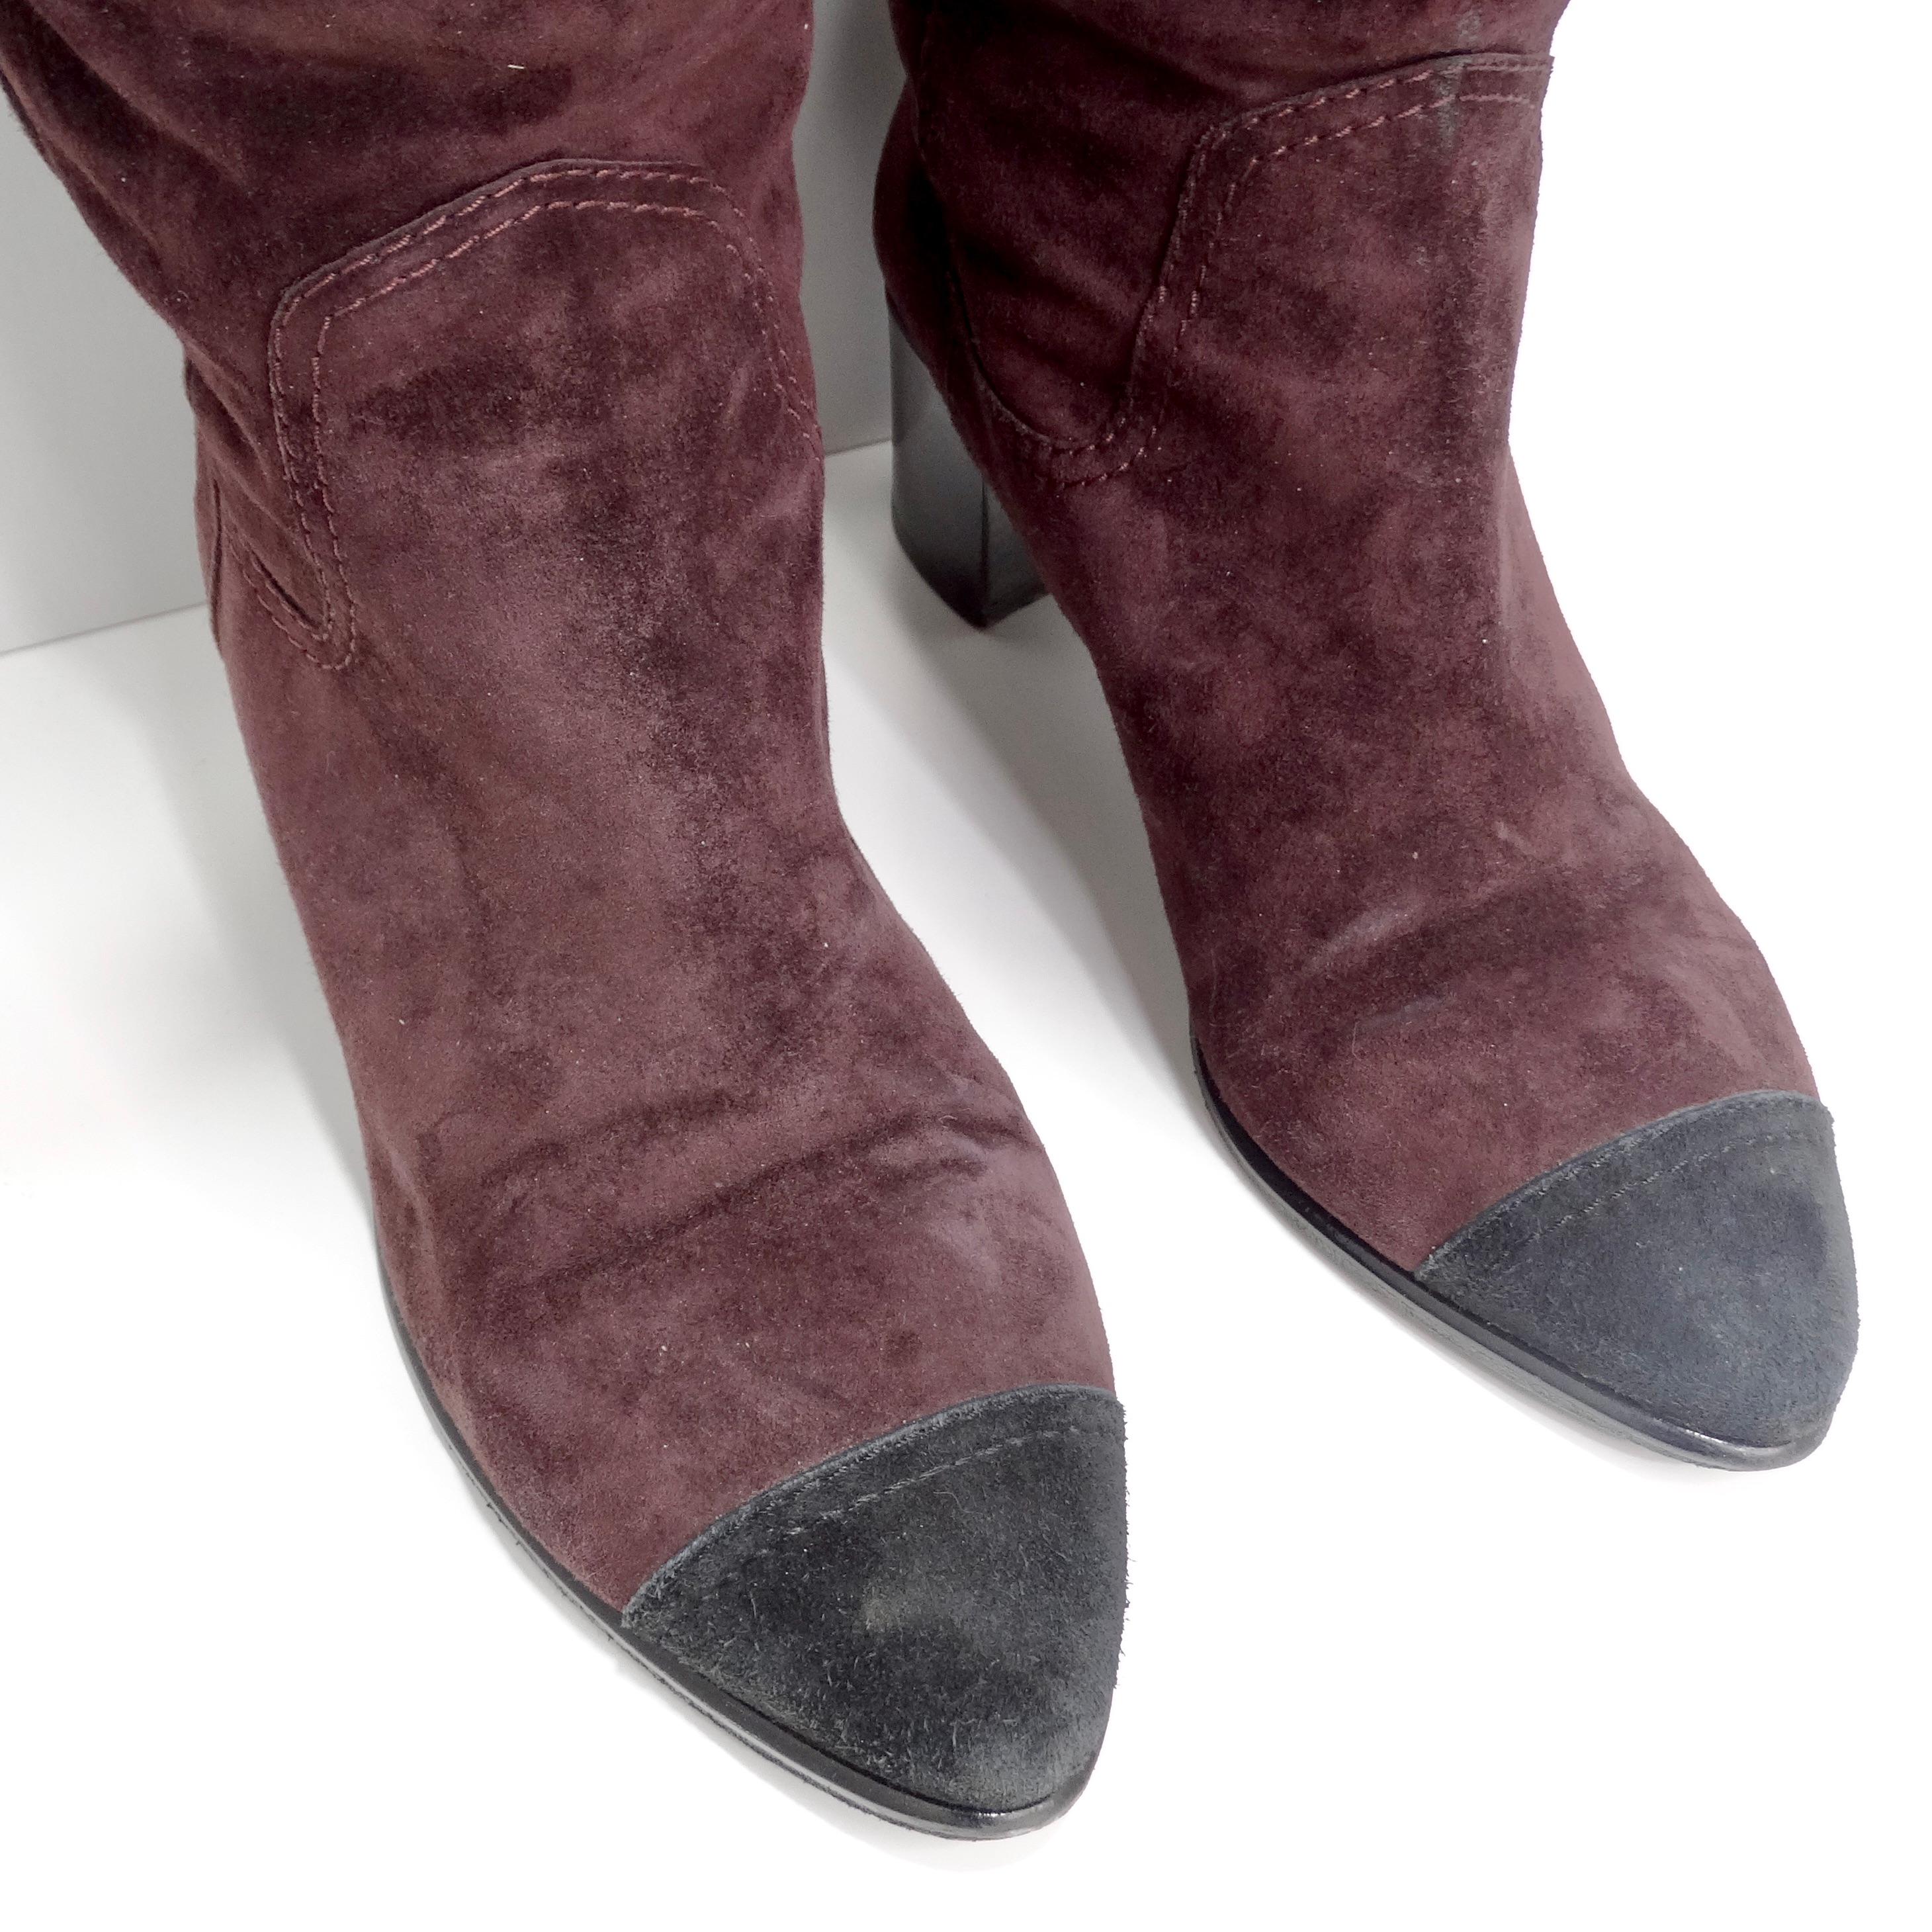 Burgundy Suede Cap Toe Over The Knee Boots In Good Condition For Sale In Scottsdale, AZ